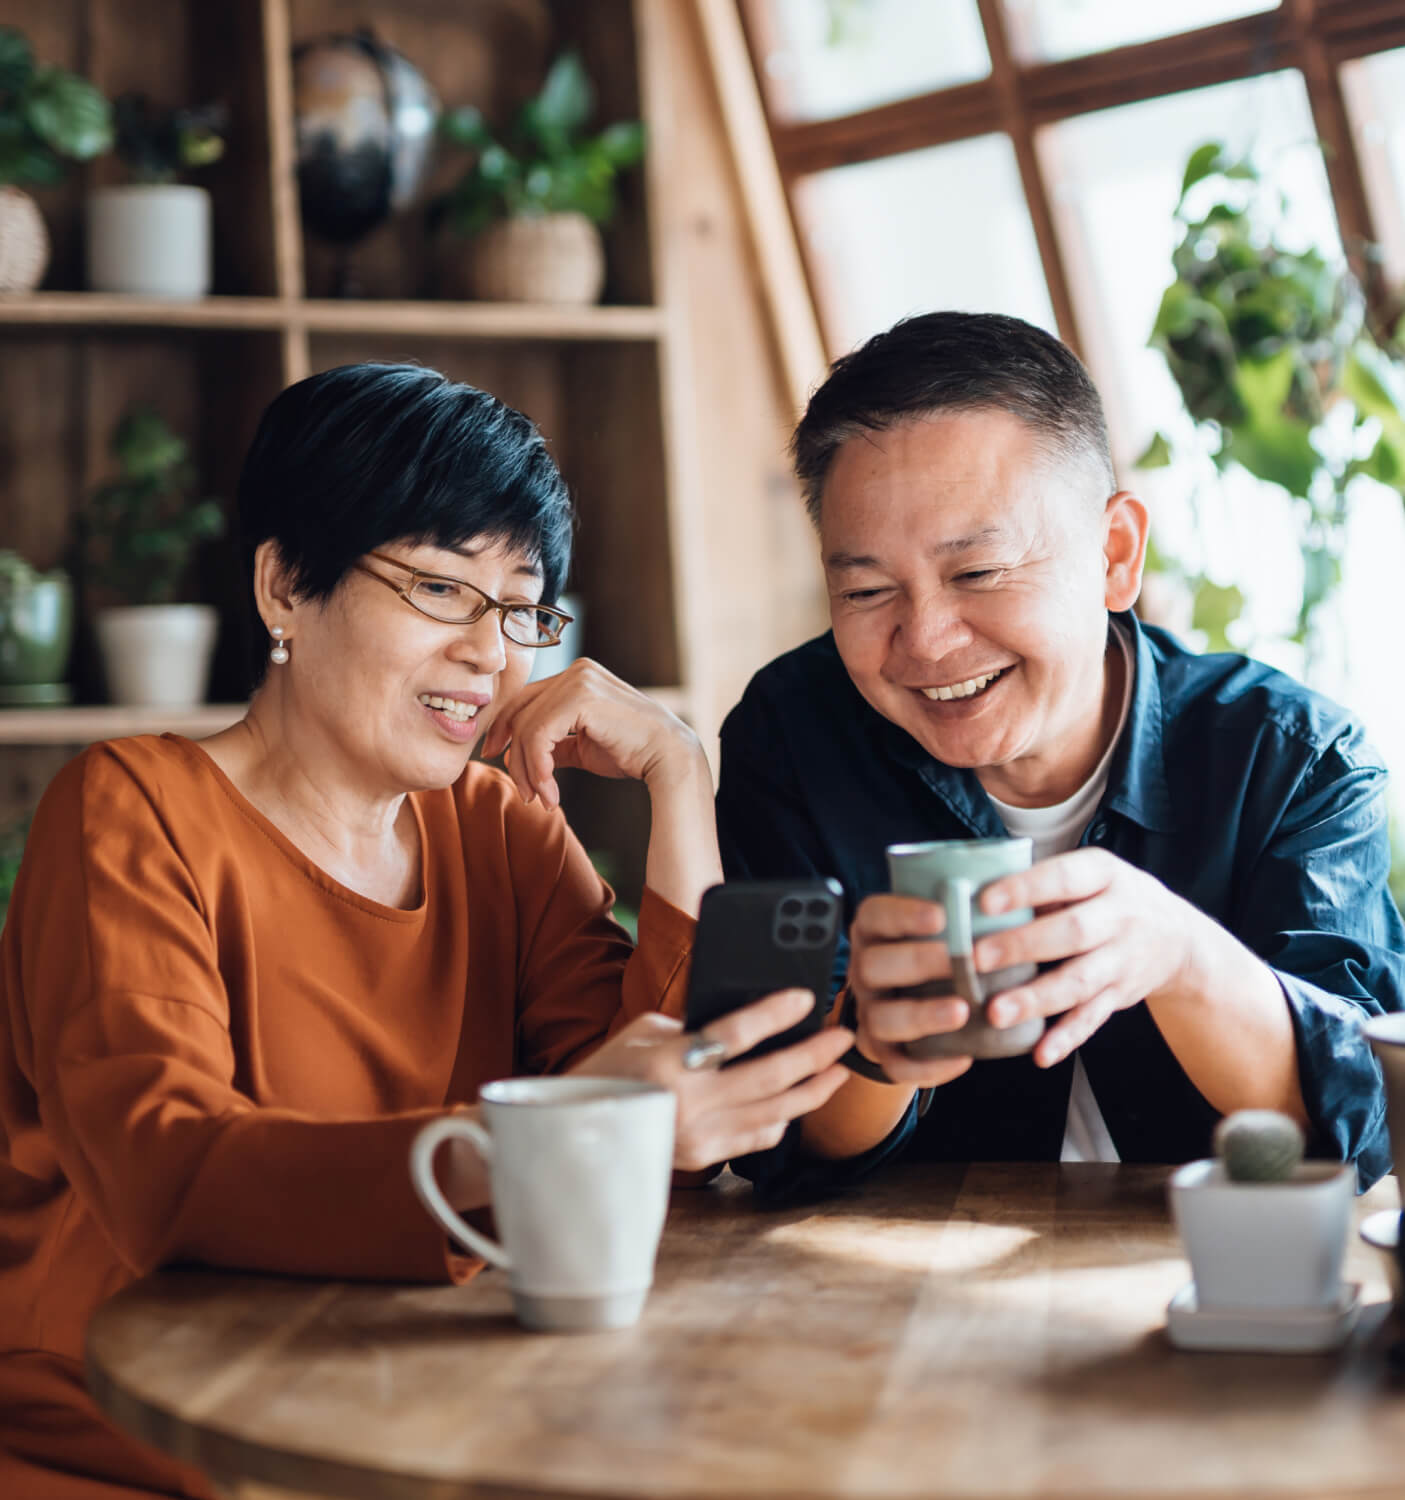 Man and woman drinking coffee and looking at phone